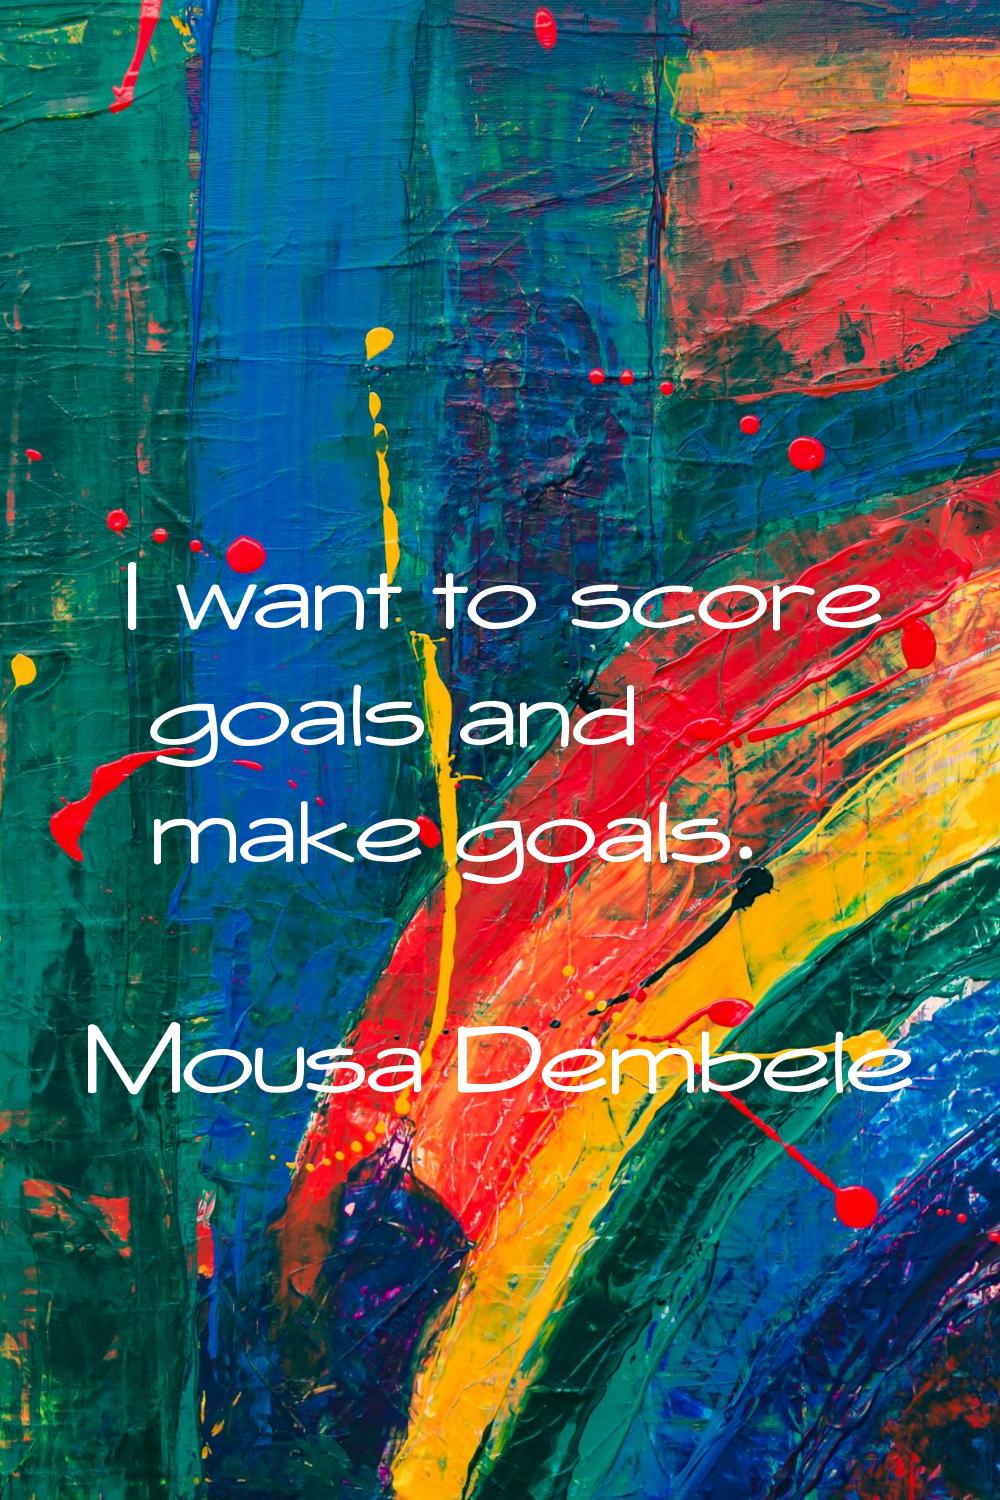 I want to score goals and make goals.